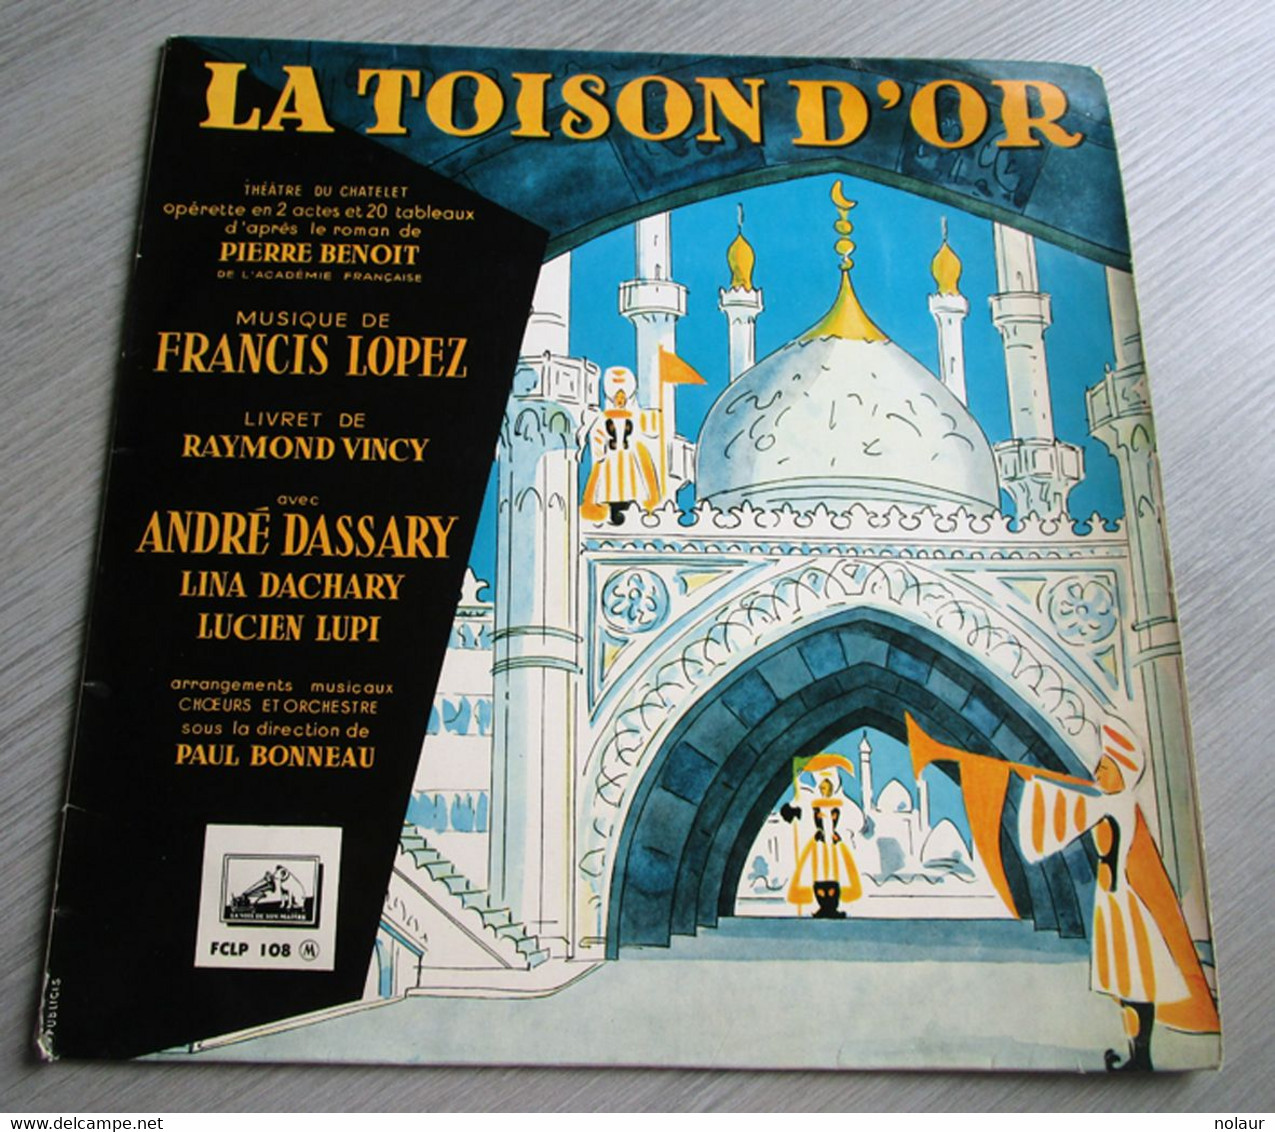 Francis Lopez / André Dassary / Lina Dachary / Lucien Lupi ‎– La Toison D'Or - Opera